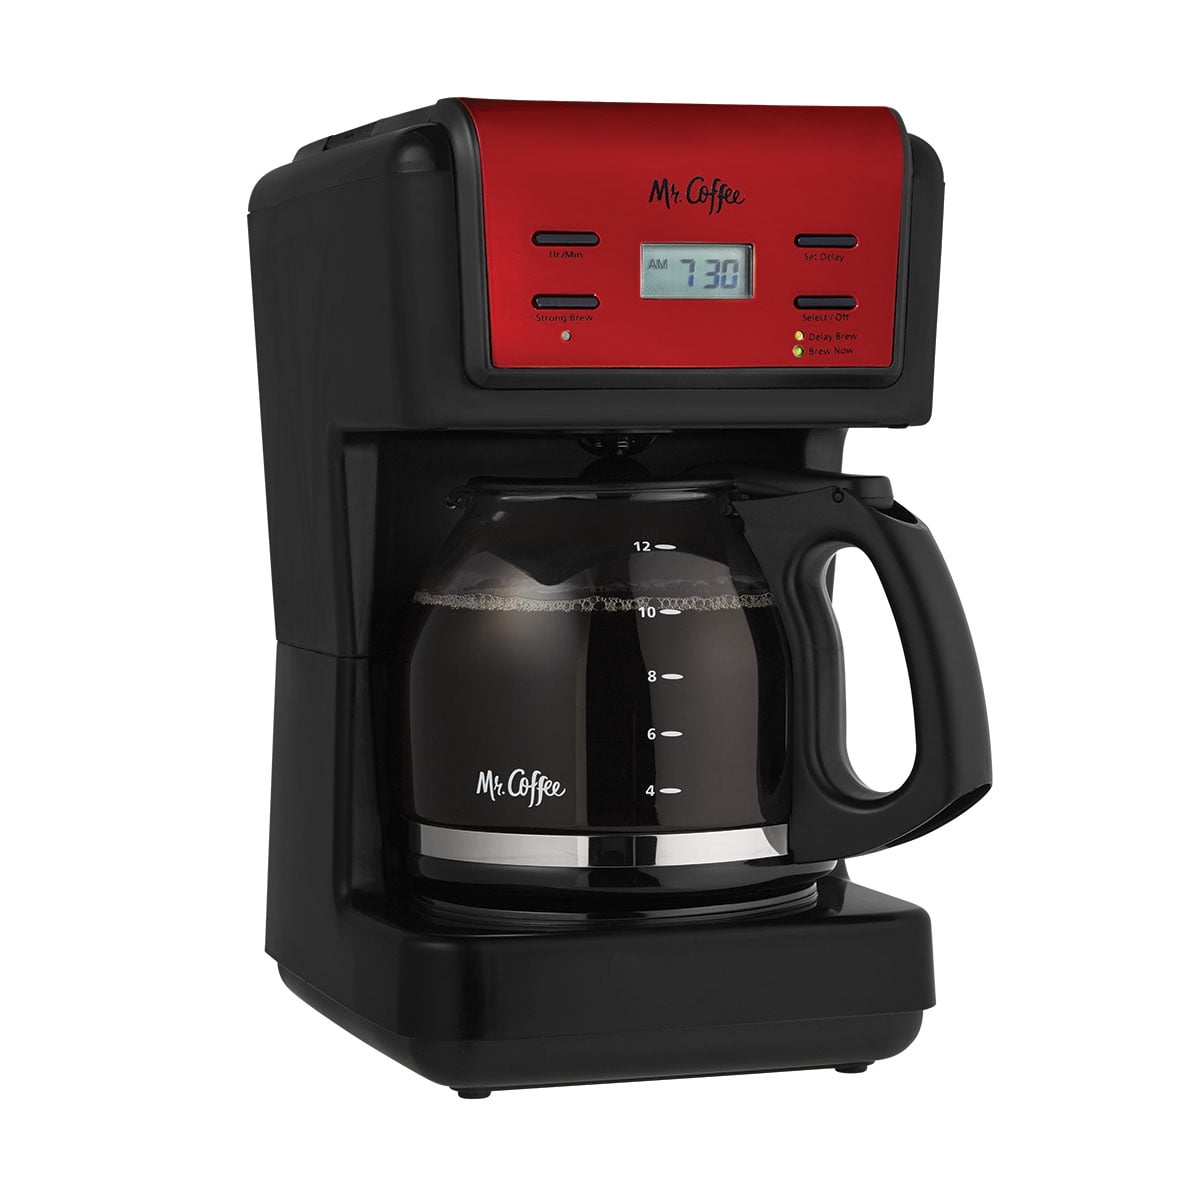 Mr. Coffee 12-cup Programmable Coffee Maker - Black/stainless Steel : Target